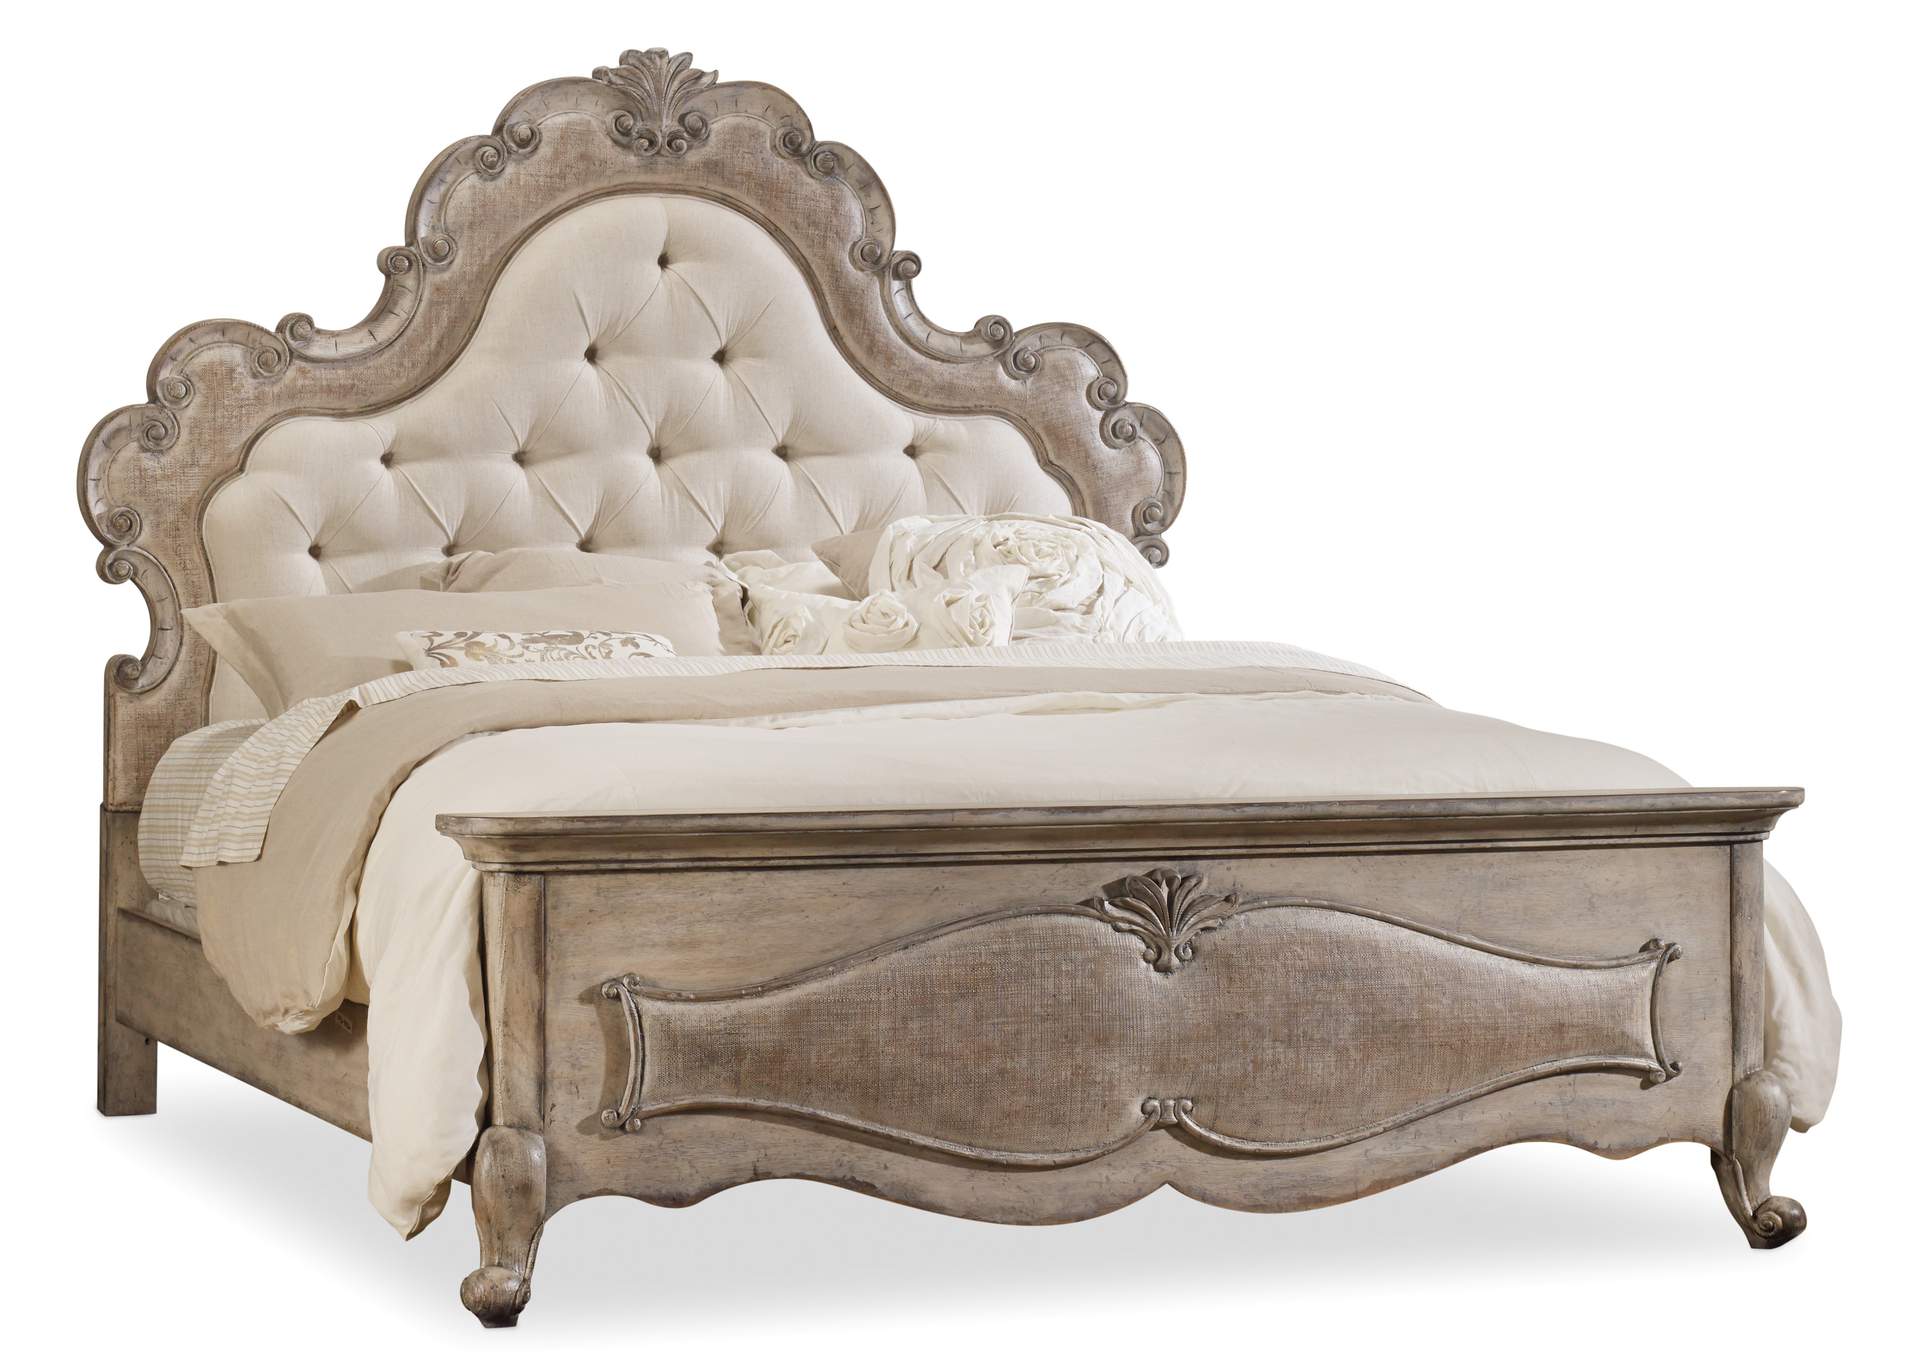 Chatelet Queen Upholstered Panel Bed